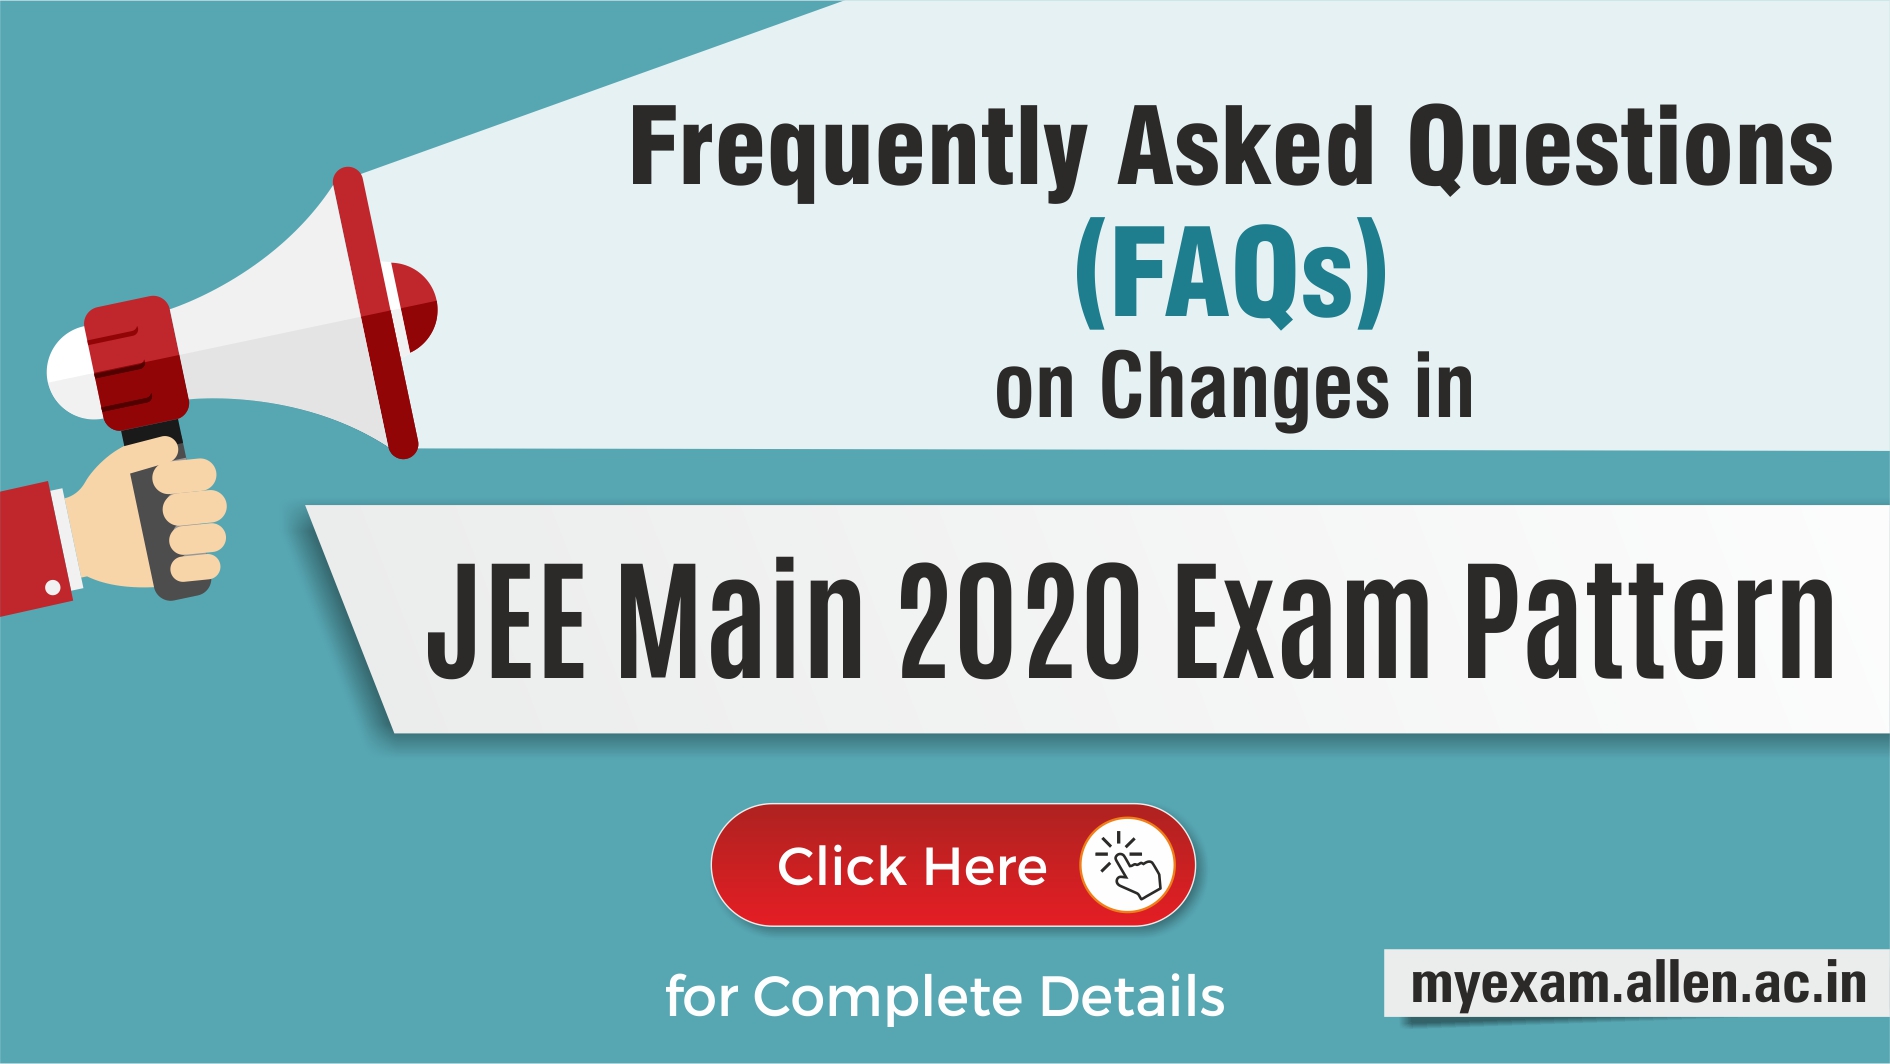 Changes in JEE Main 2020 Exam pattern